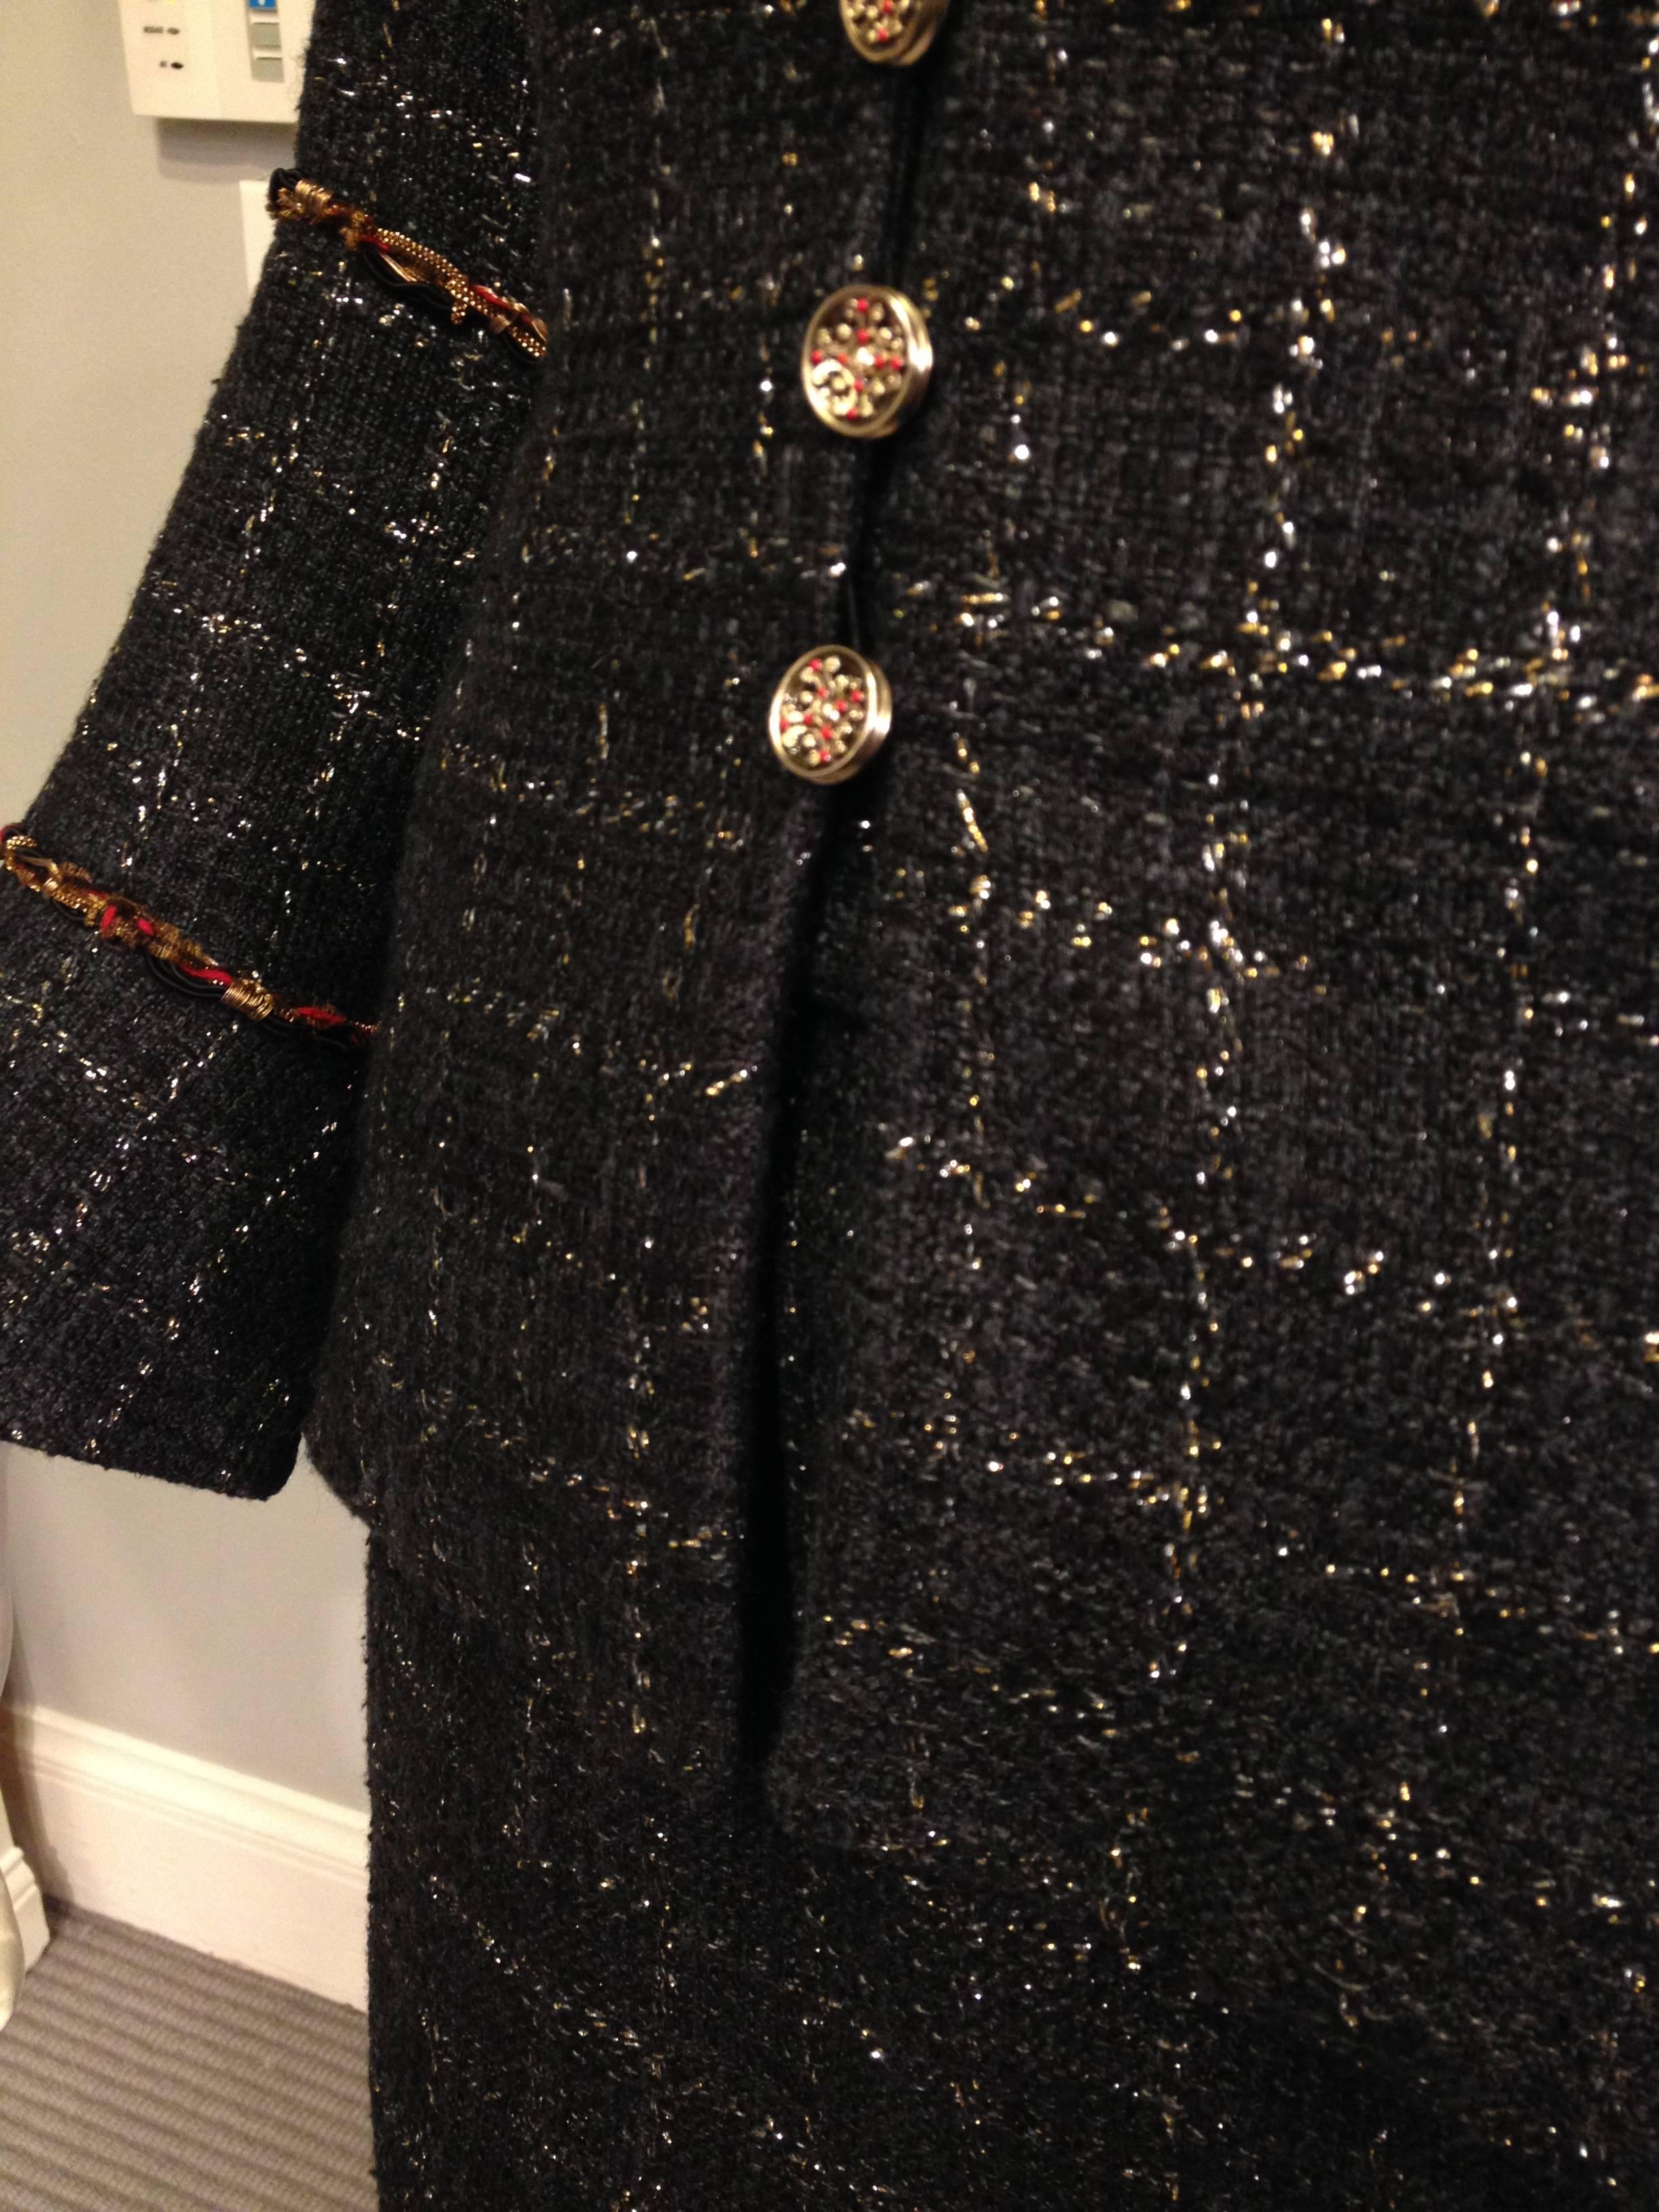 Black Chanel Navy Tweed Suit with Sparkly Windowpane Pattern